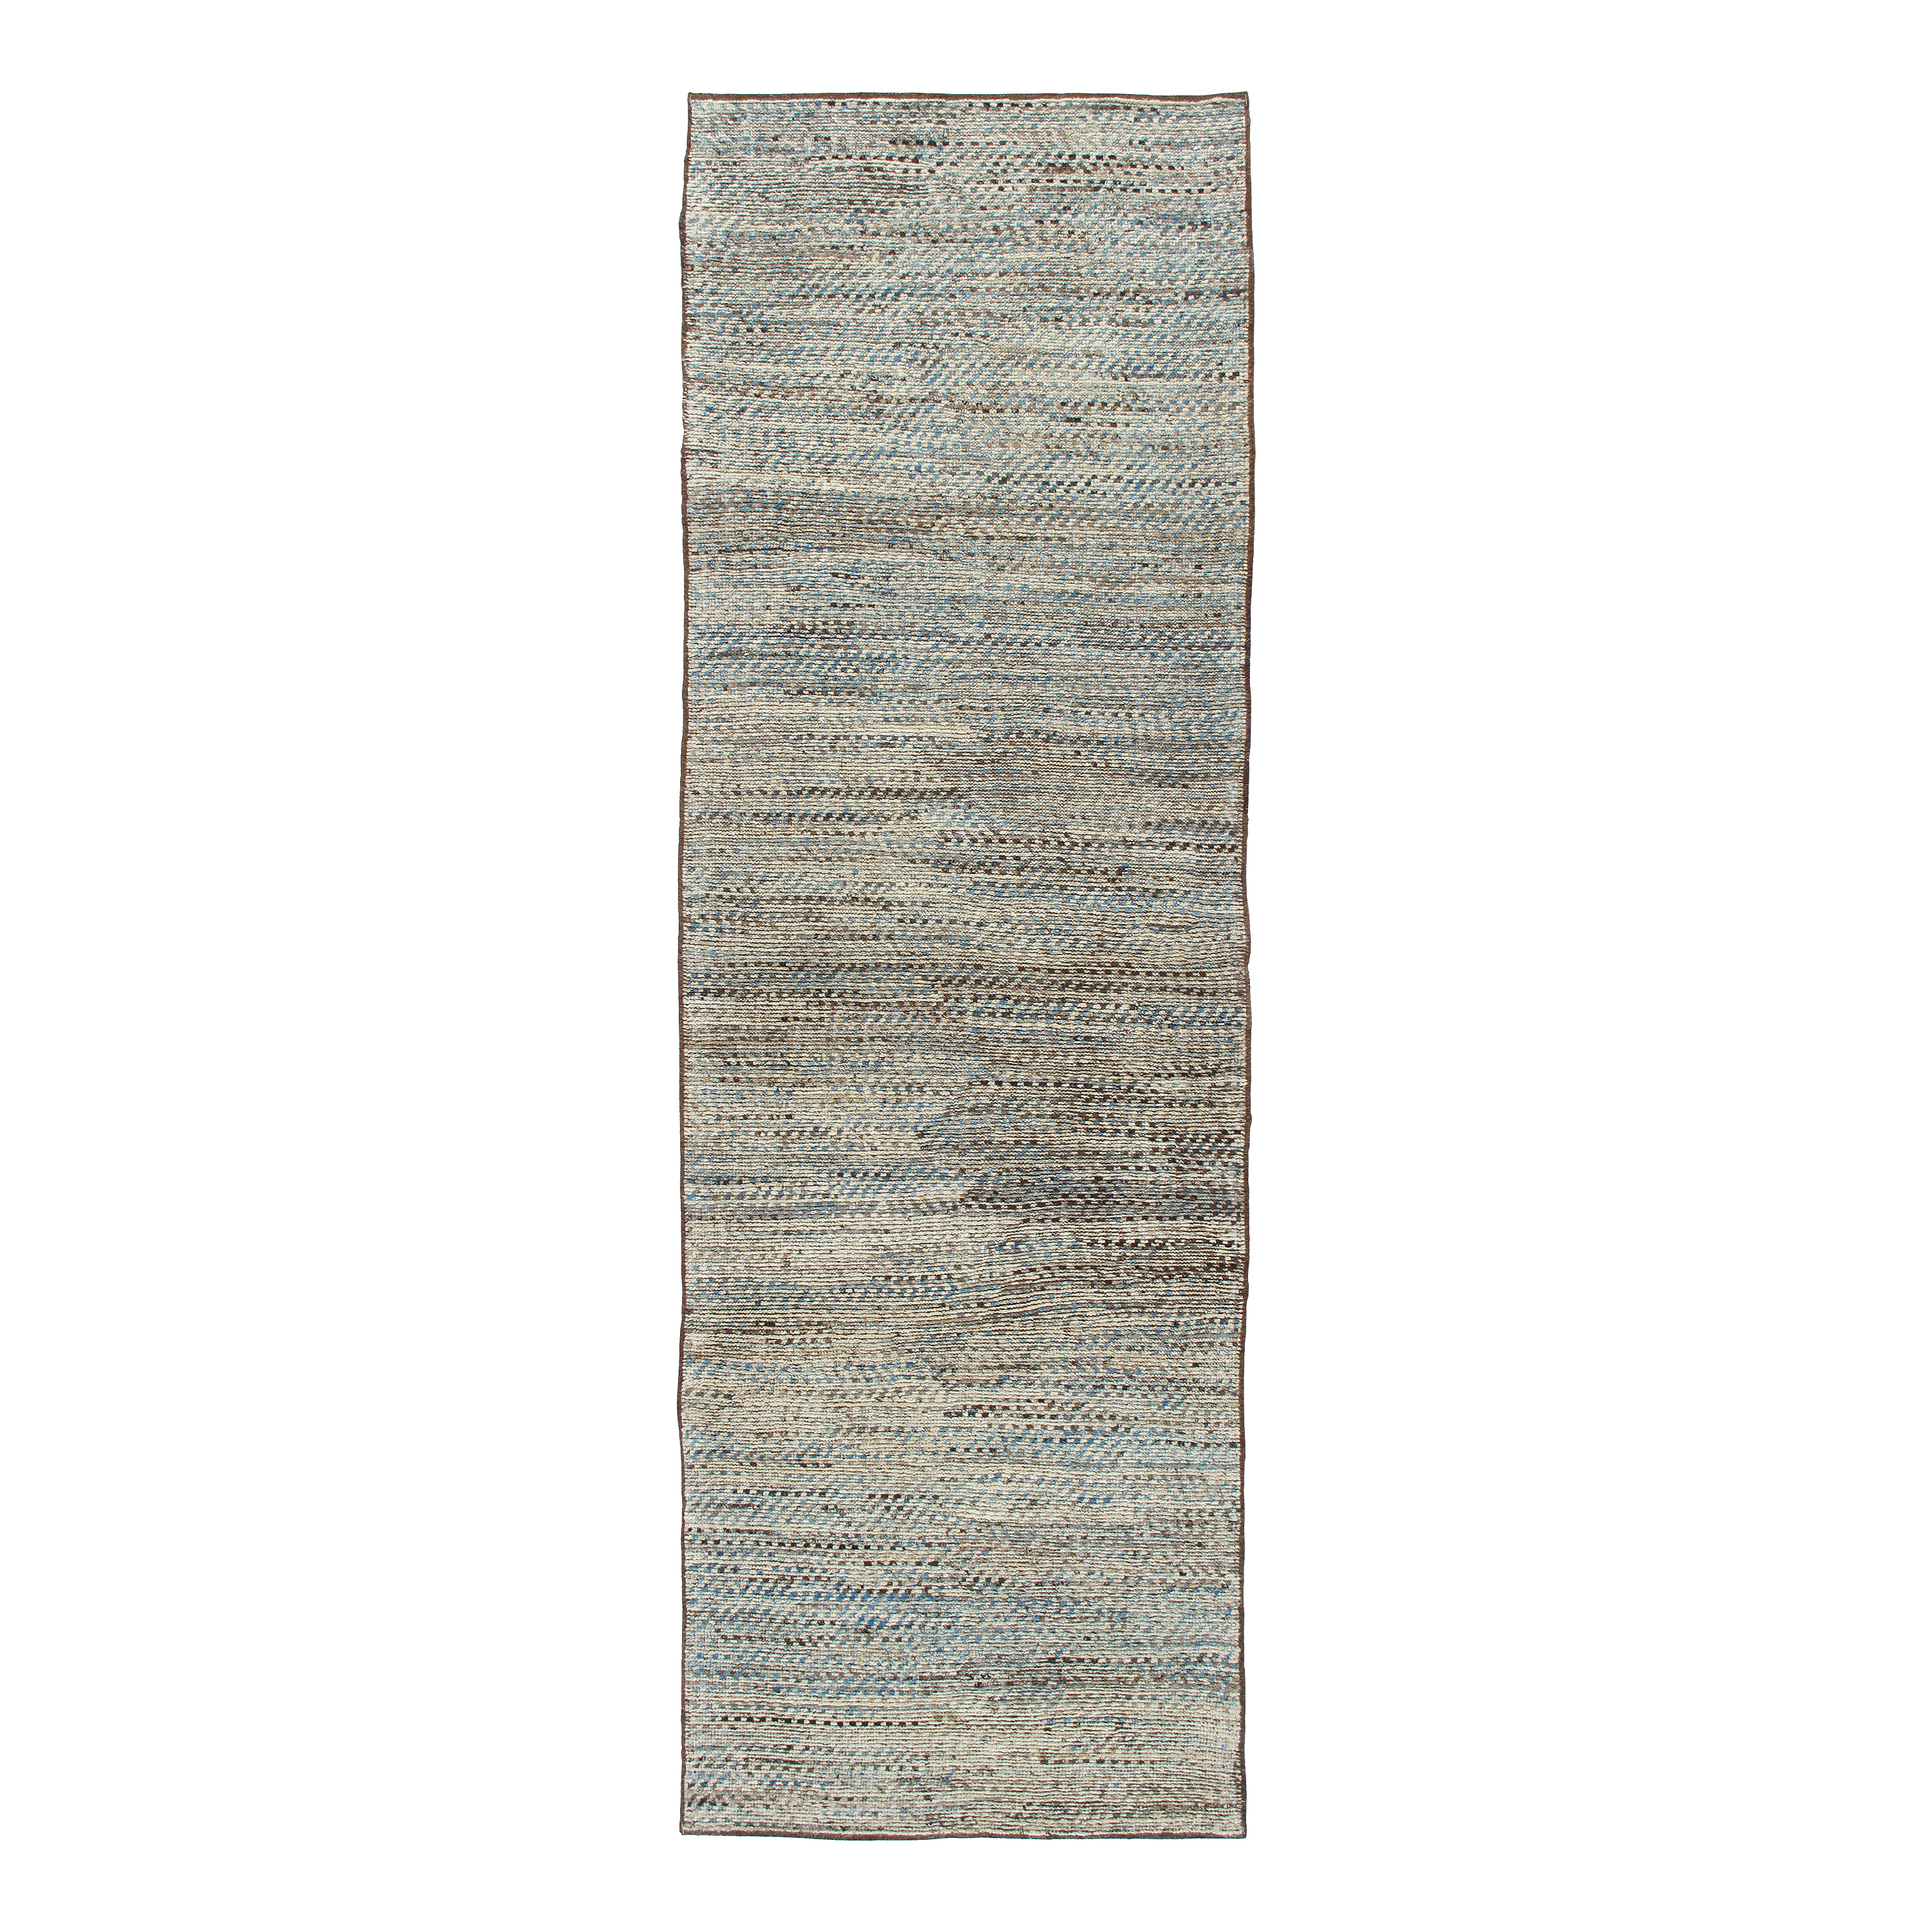 Amazon rug is handknotted from the finest hand-carded, hand-spun, naturally dyed wool.